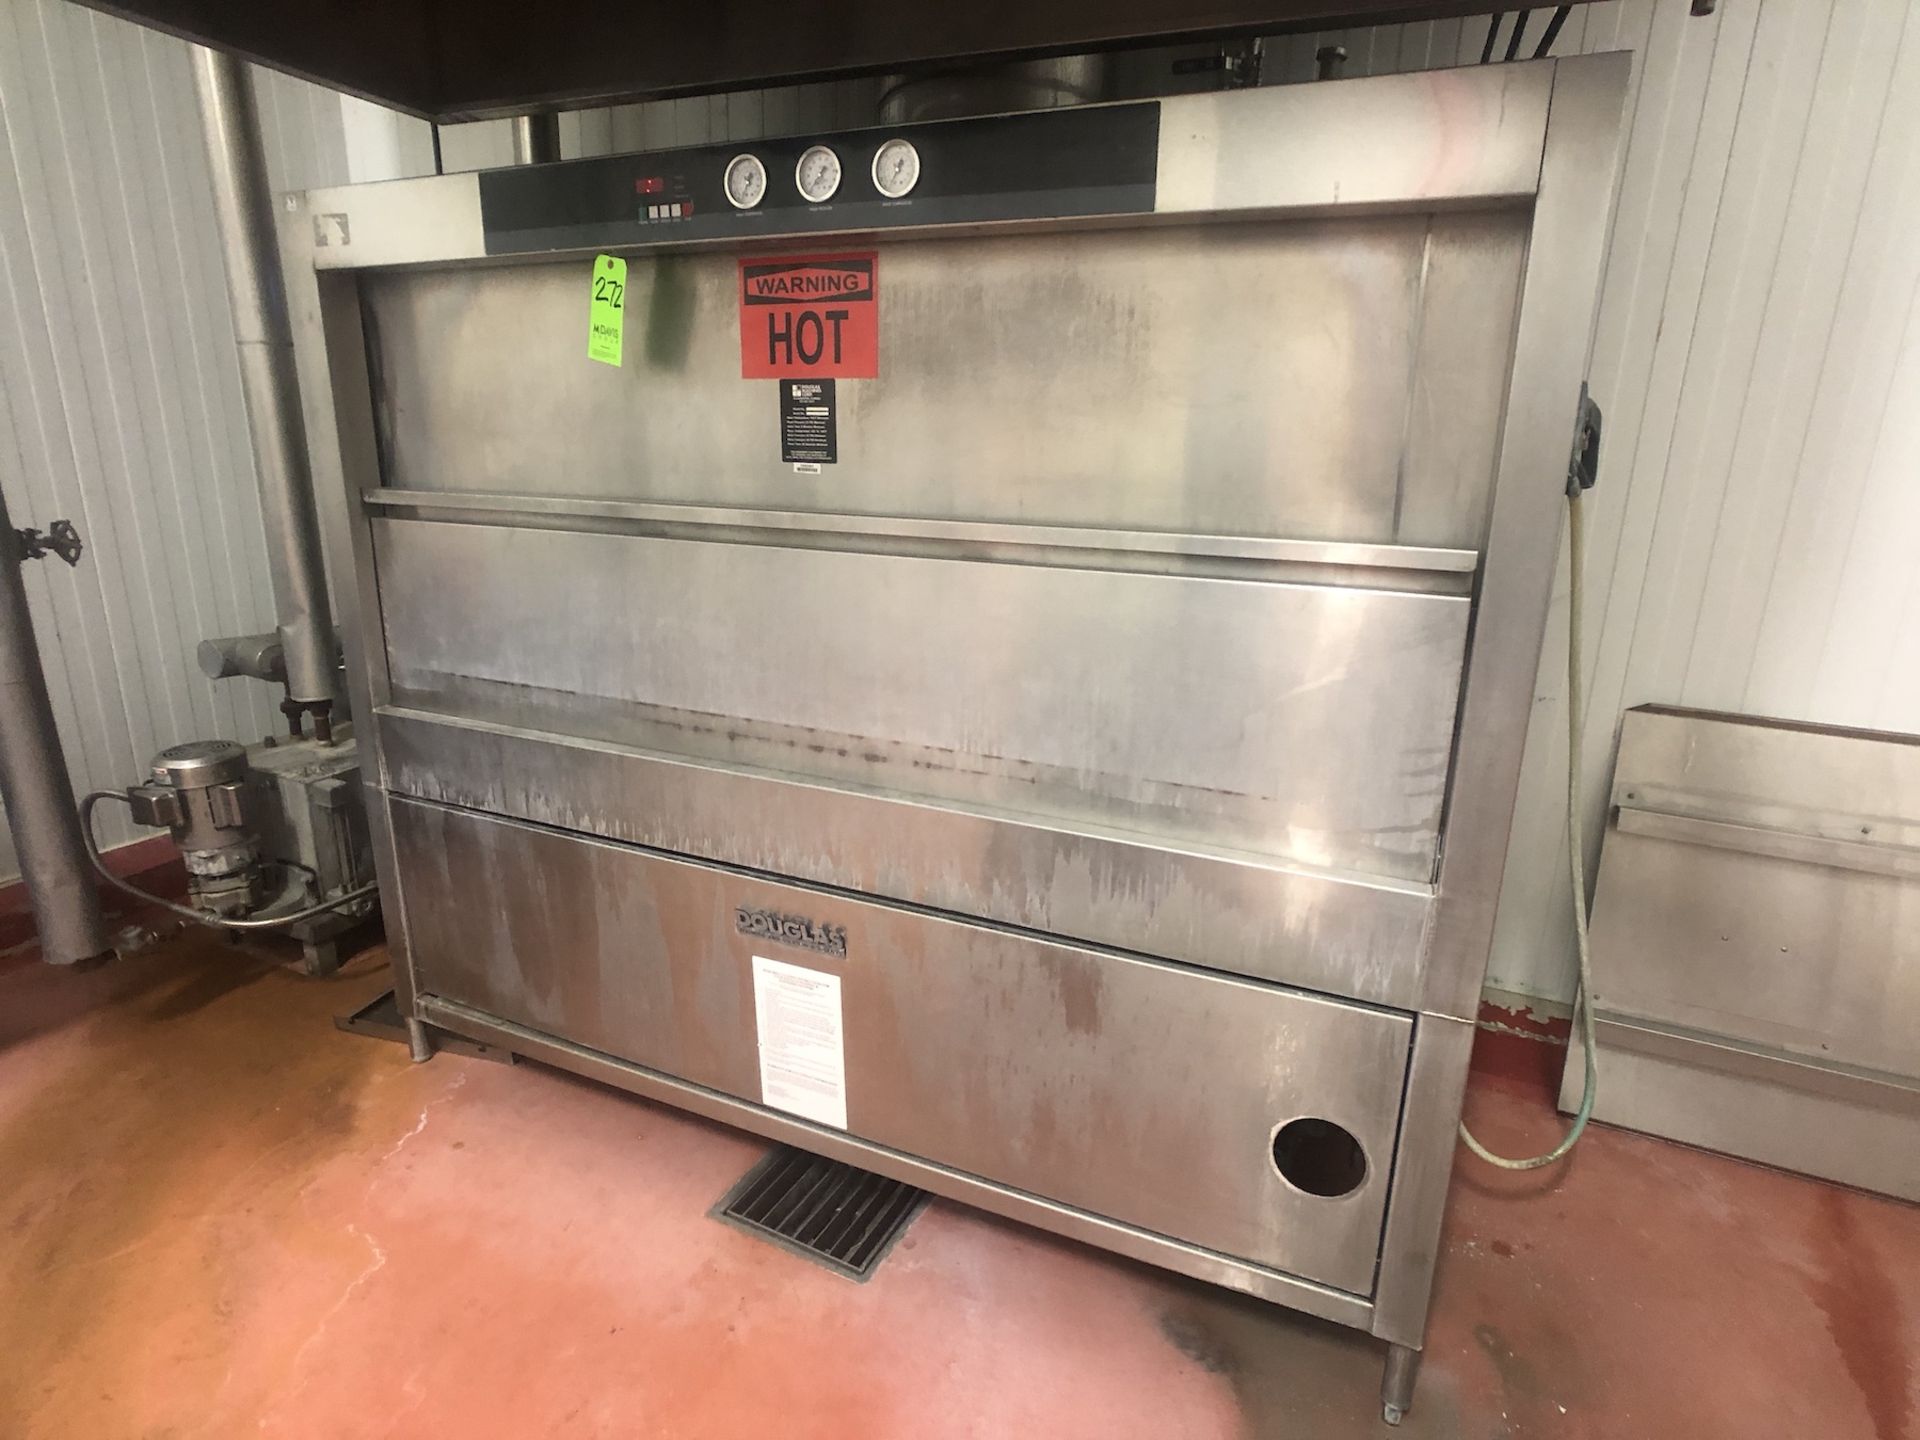 DOUGLAS MACHINE CORP DISHWASHER, MODEL SD-36-SCSC, WITH HOT WATER TANK (BELIEVED TO BE 2015) - Image 2 of 14